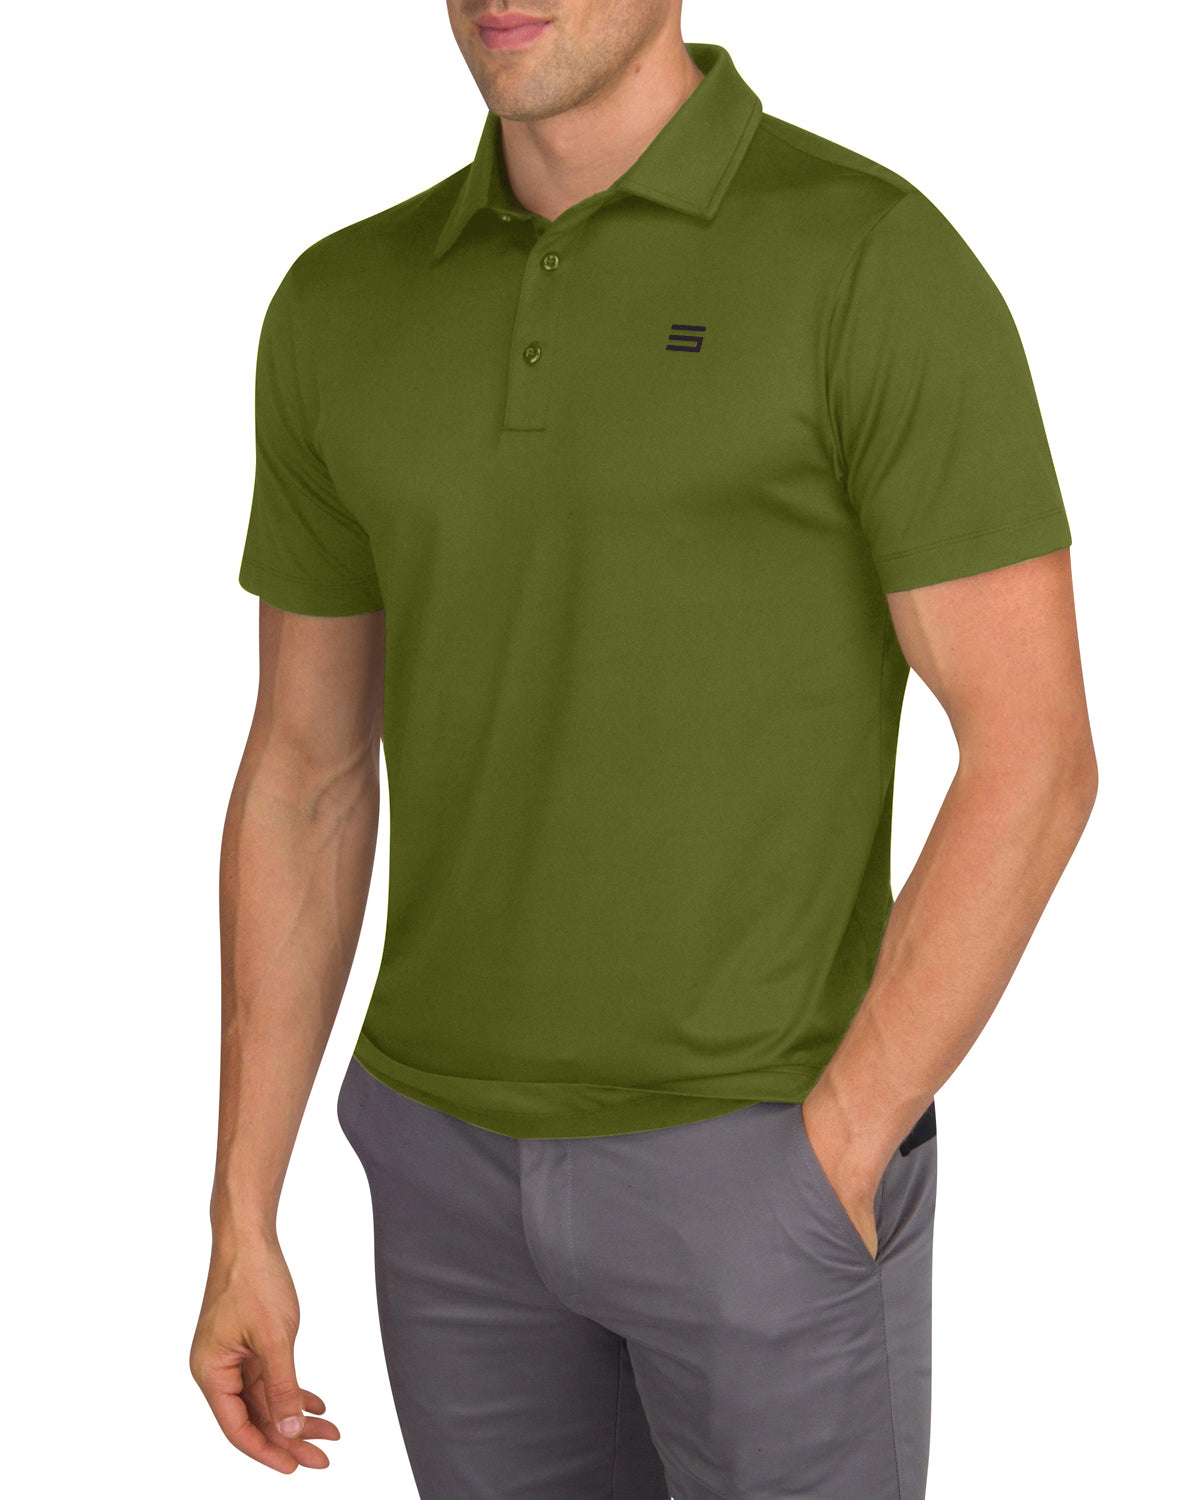 Untucked Golf Polo - The Perfect Length - Extreme Deal